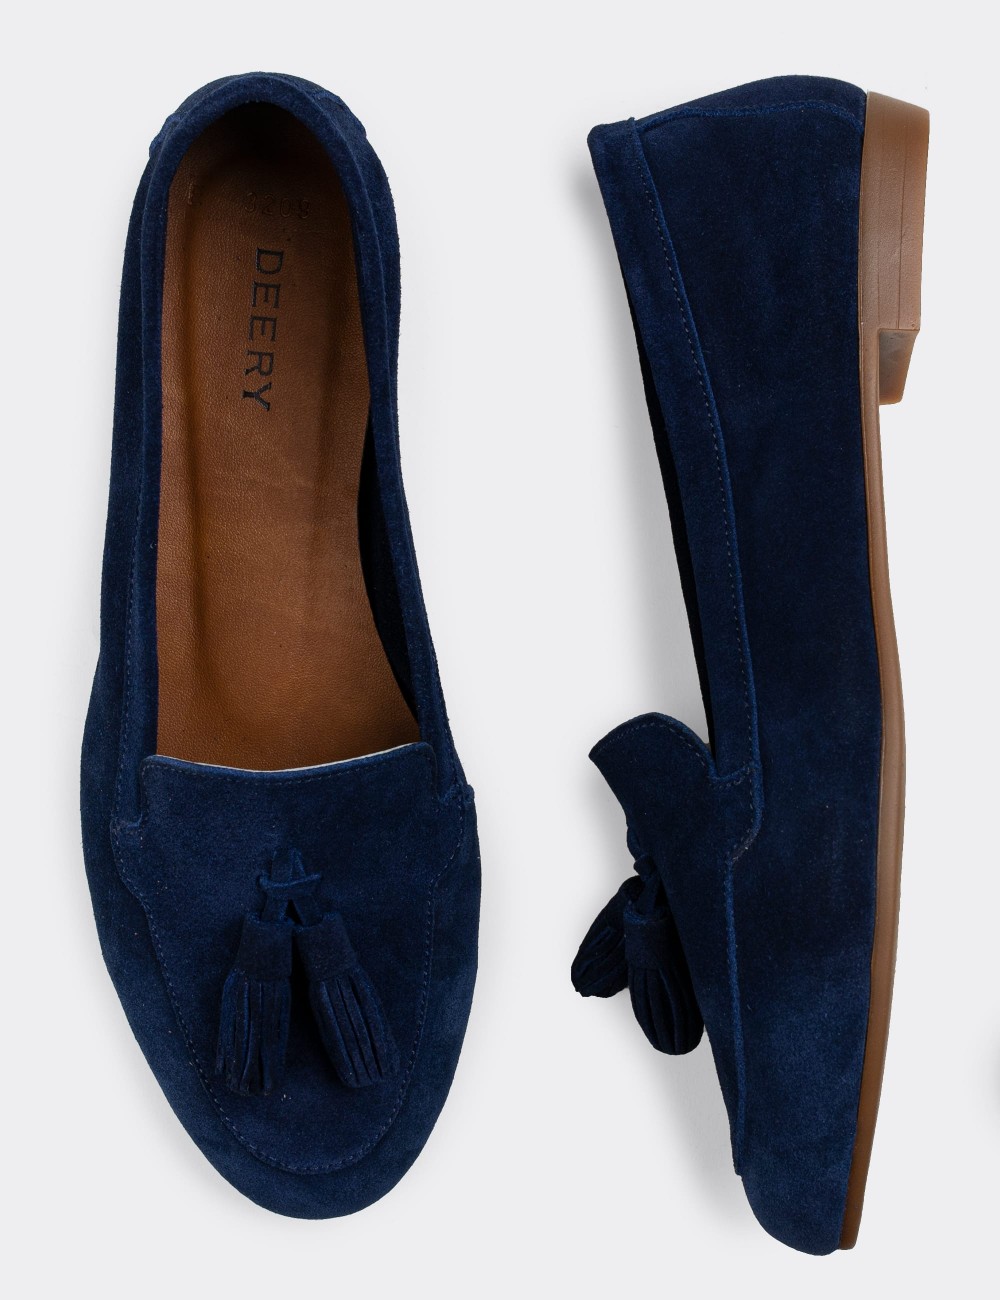 Navy Suede Leather Loafers - E3209ZLCVC02